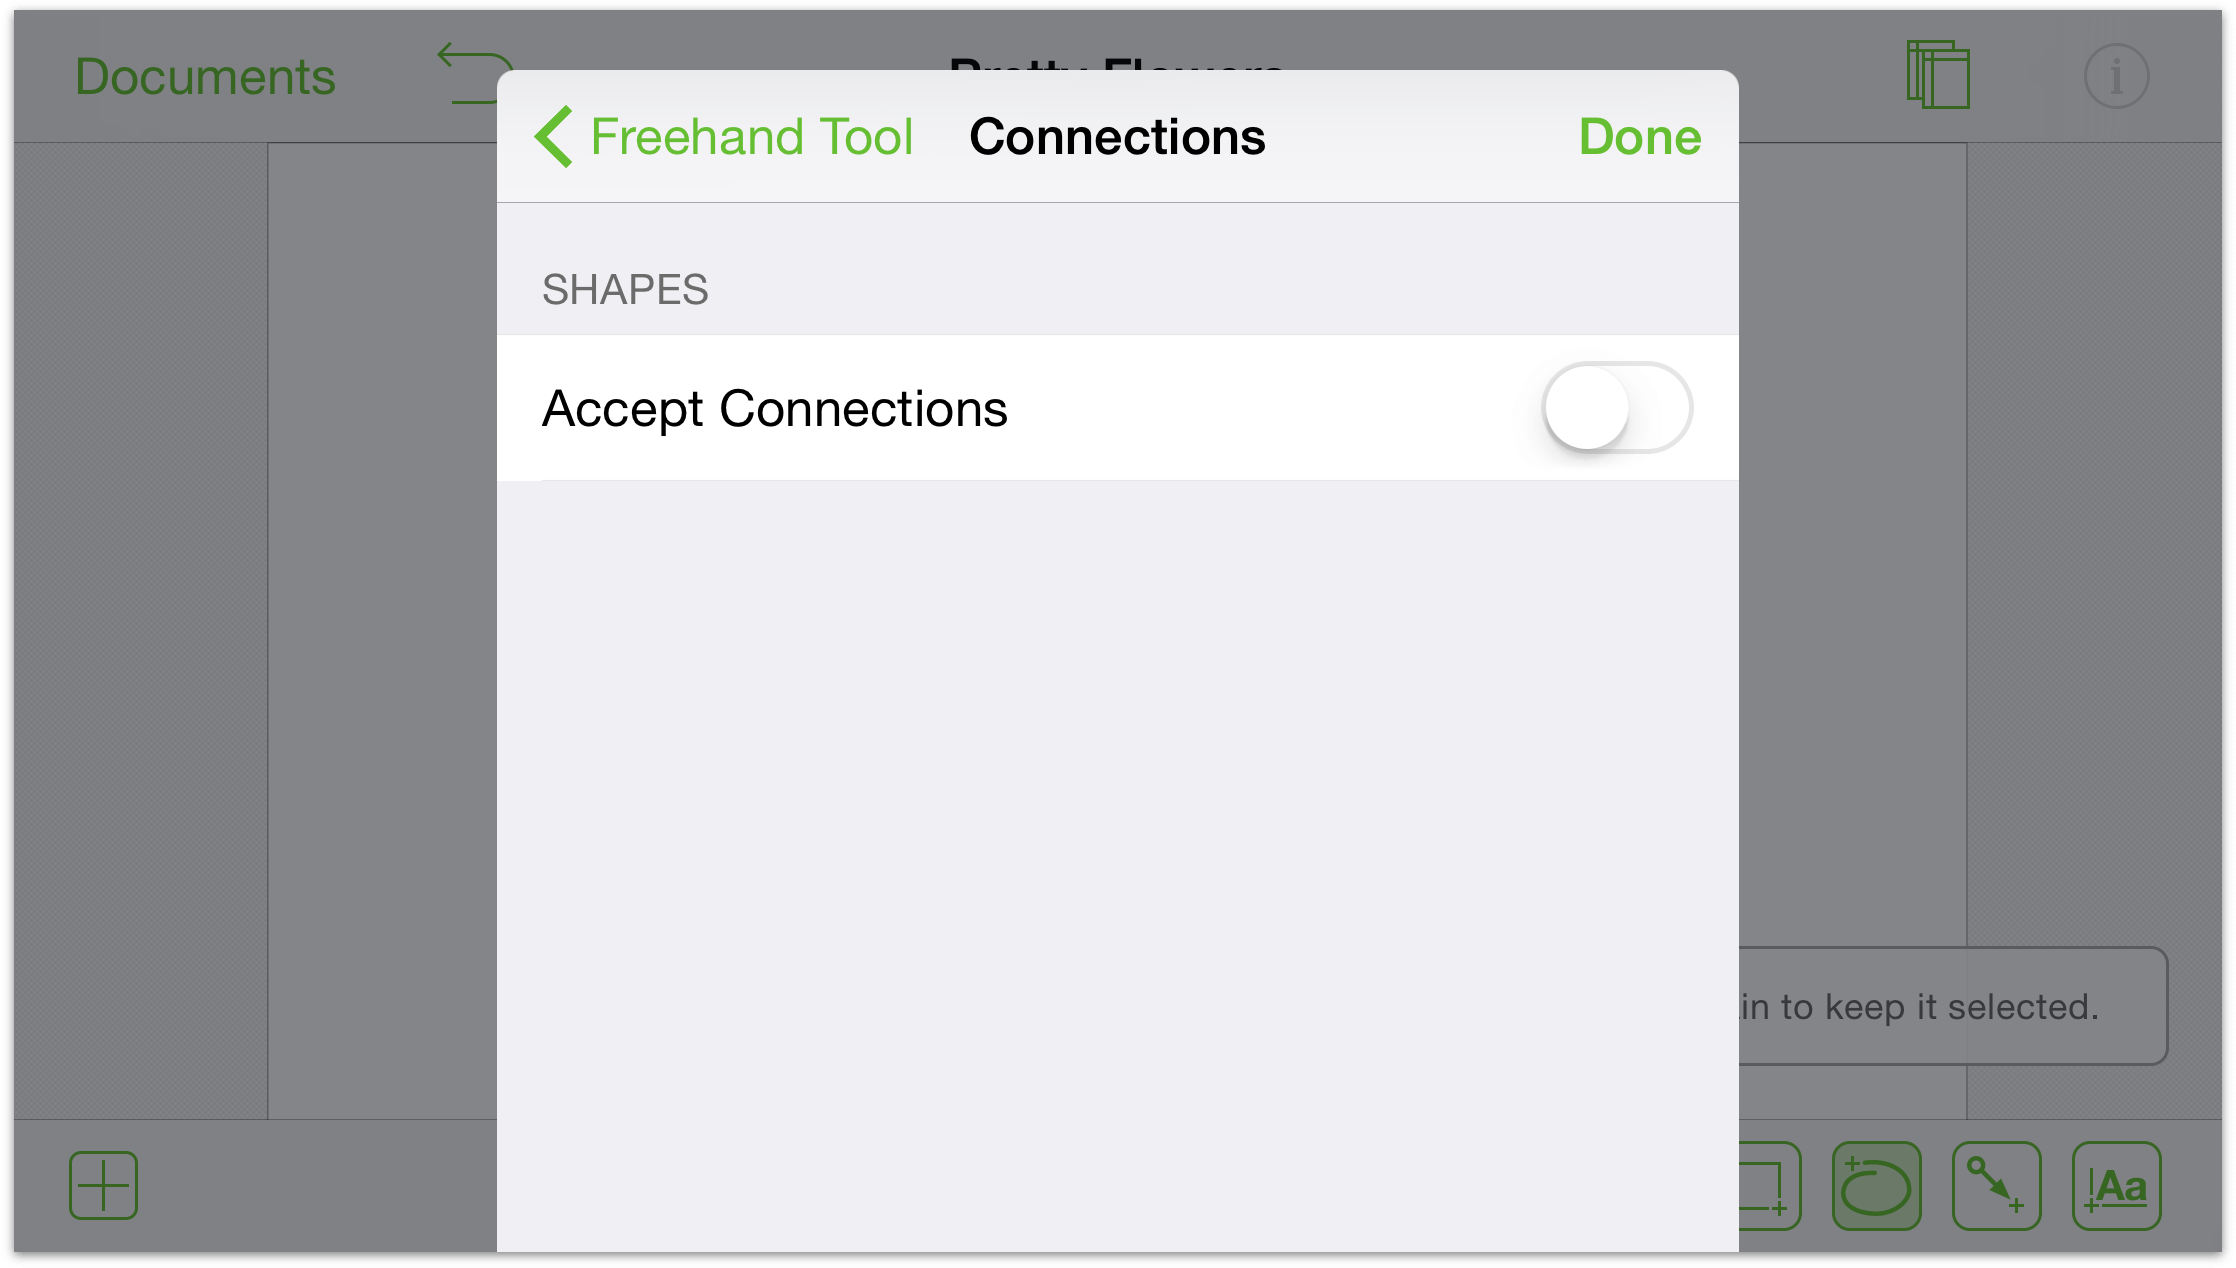 The Accept Connections option is turned off